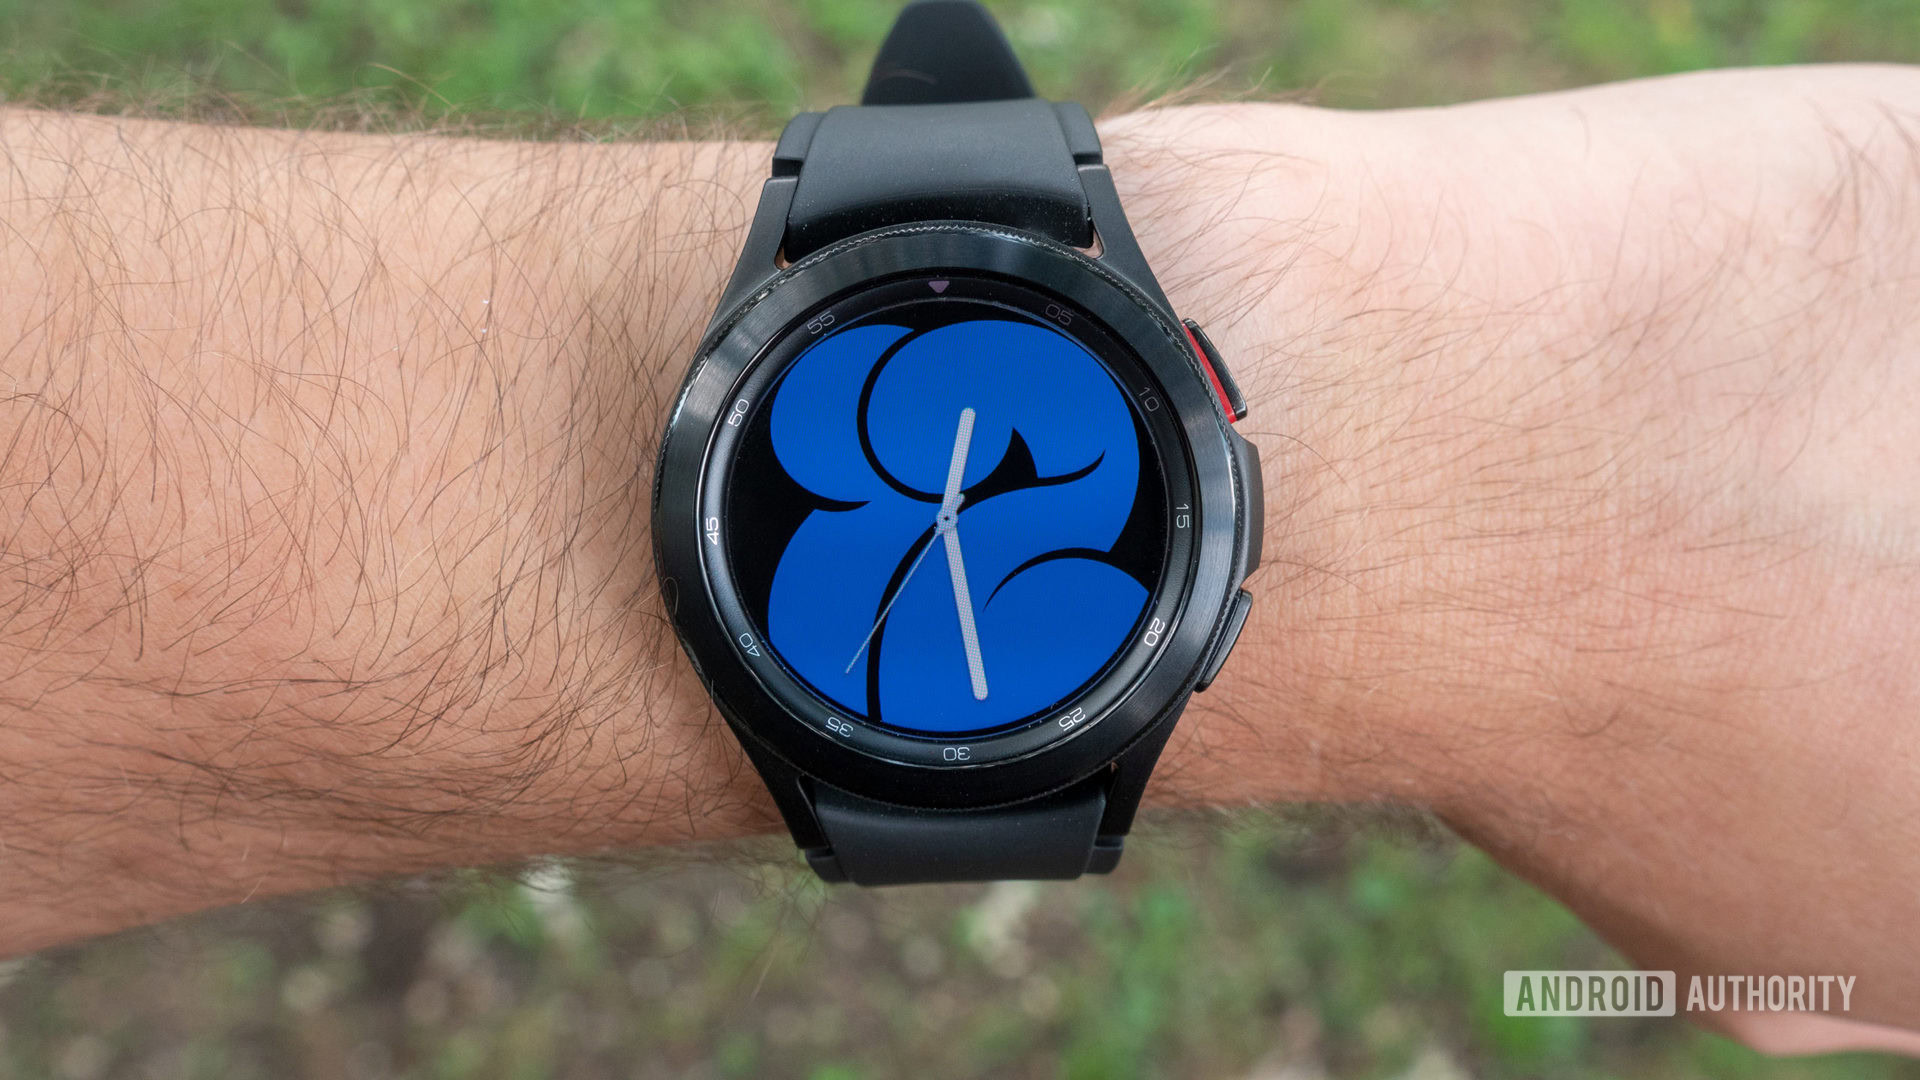 The Samsung Galaxy Watch 4 Classic on a wrist showing the watch face.